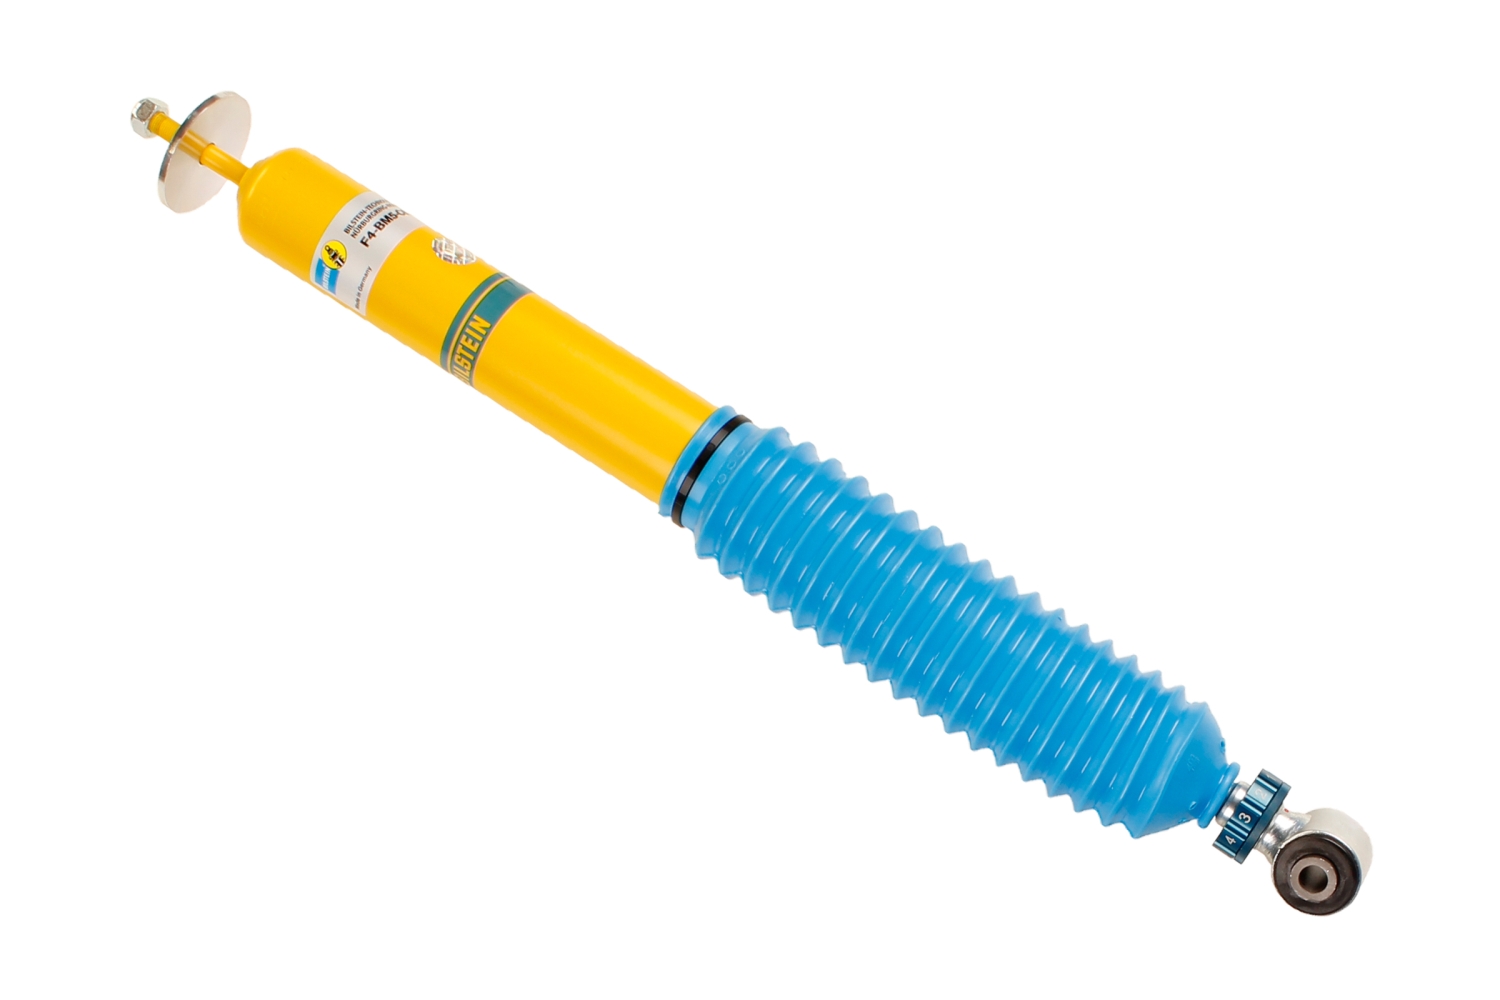 Bilstein B16 PSS10 coilovers 48-126687 BMW - 3 Serie E46 Coupe - M3 3.2, M3 CSL 252 -265 kW - 06/00-